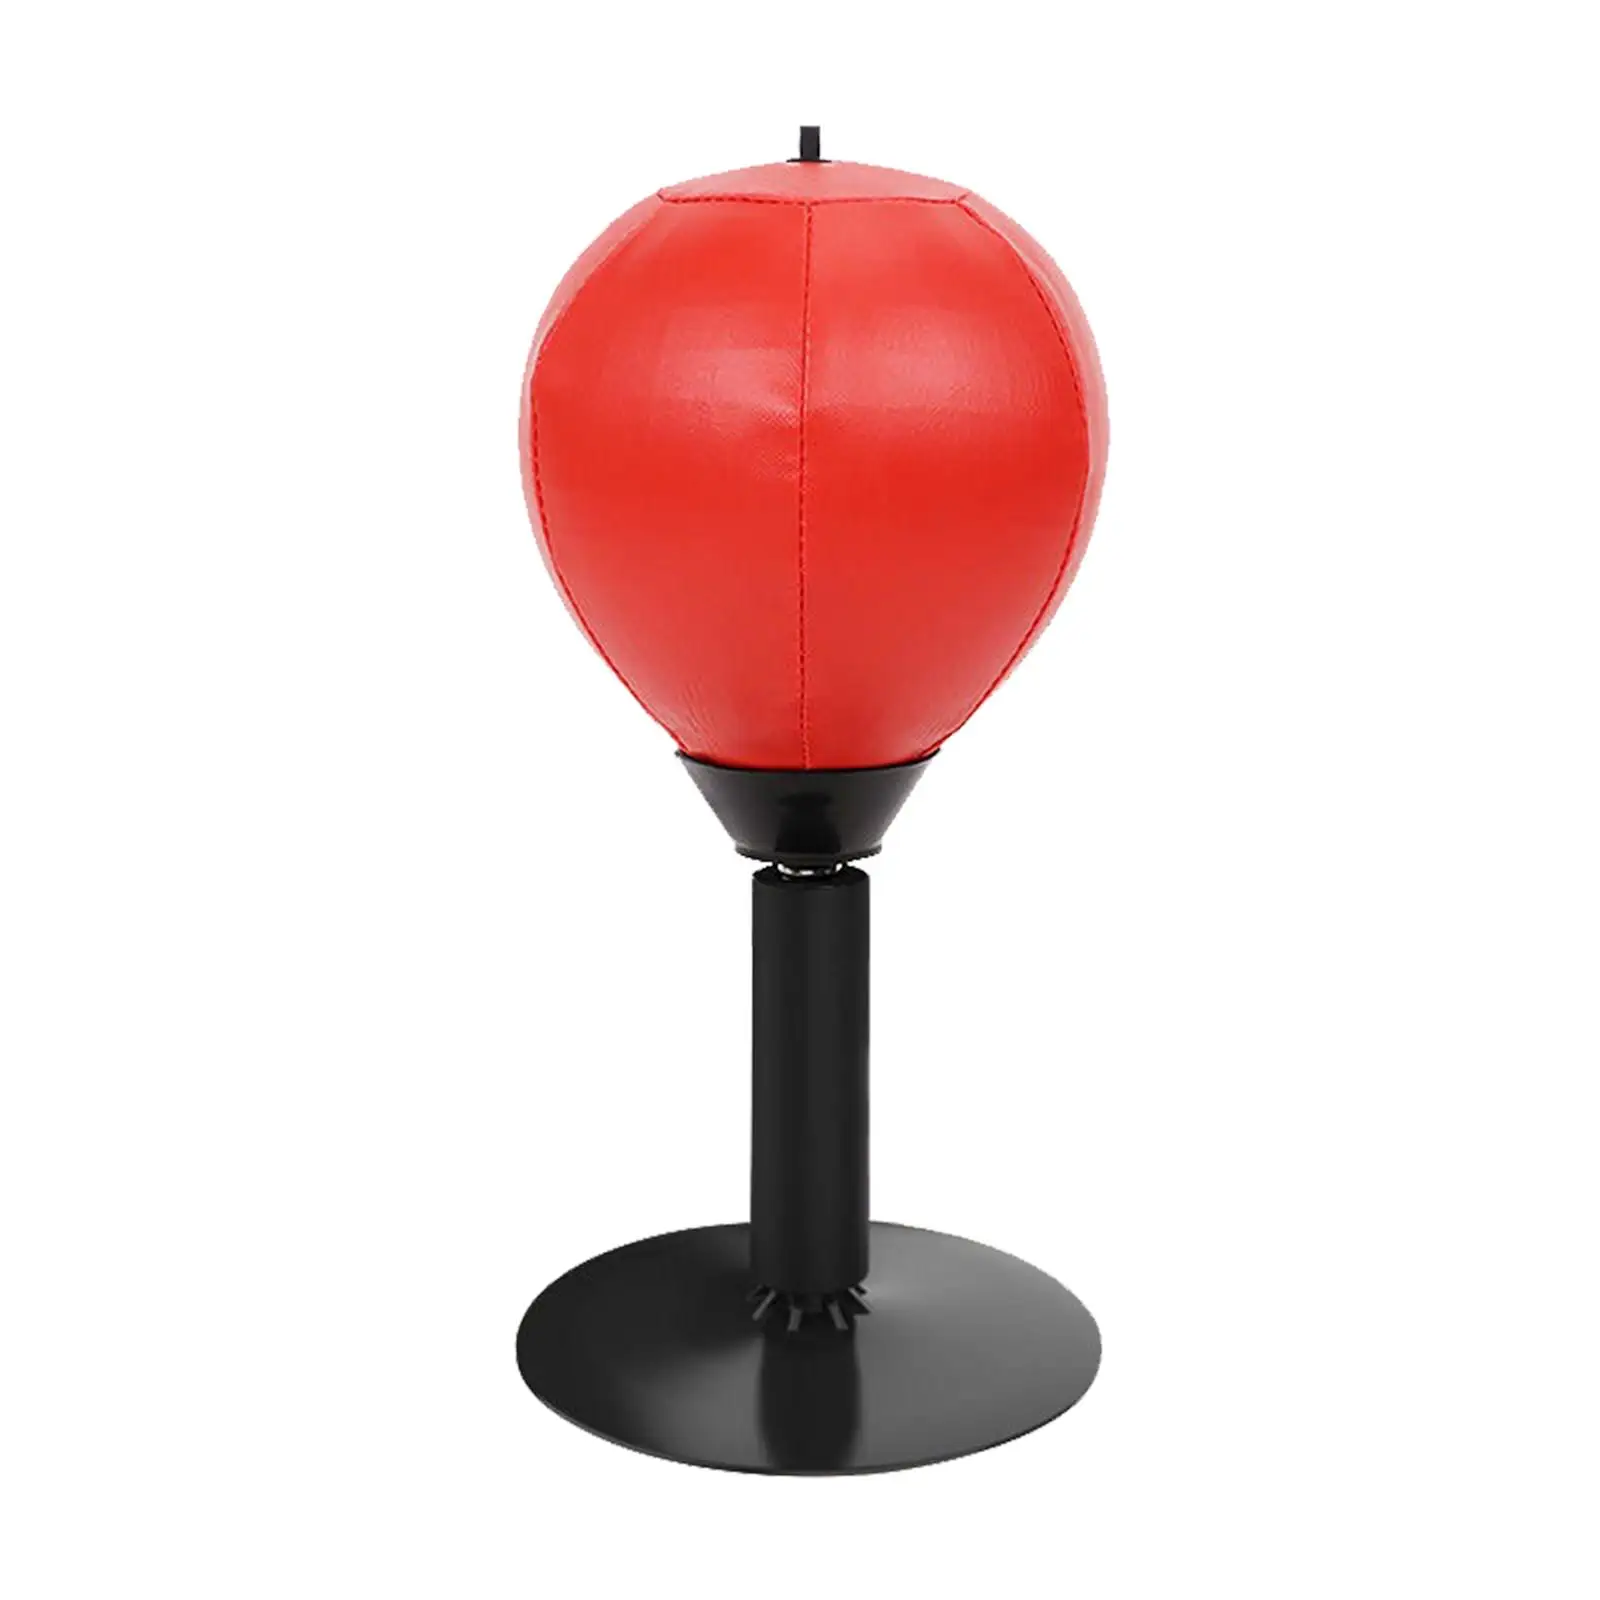 PU Desktop Boxing Ball Suction Cup Stand Punching Bag for Muay Tai Practice Workout Fitness Equipment for Kids Adults